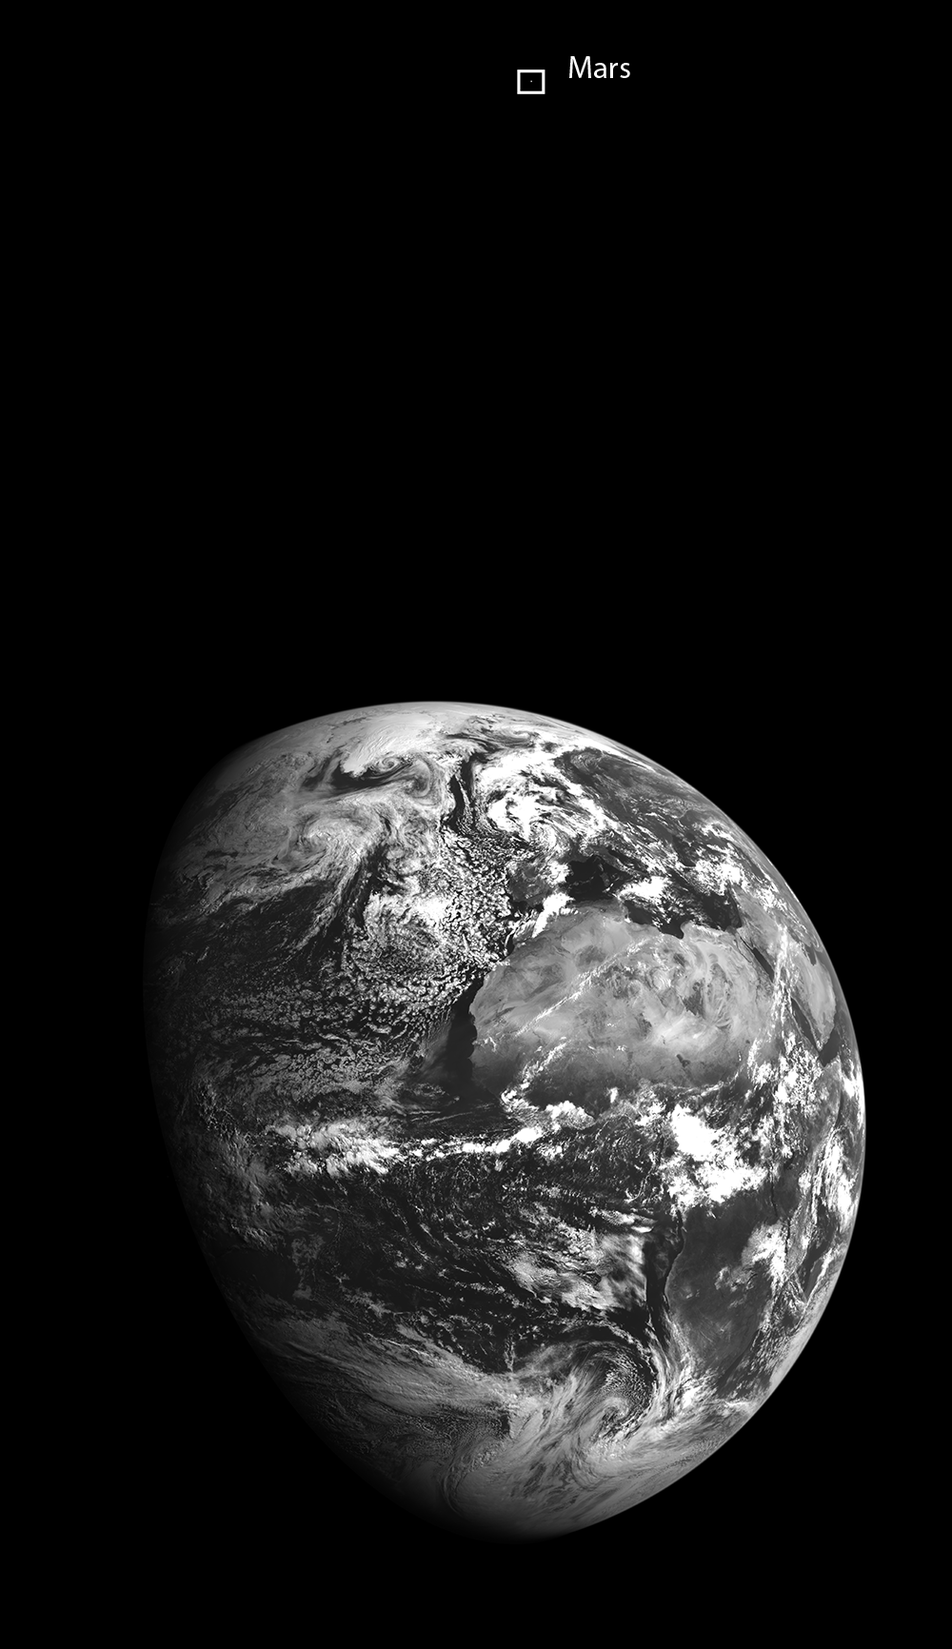 Mars and Earth in one image